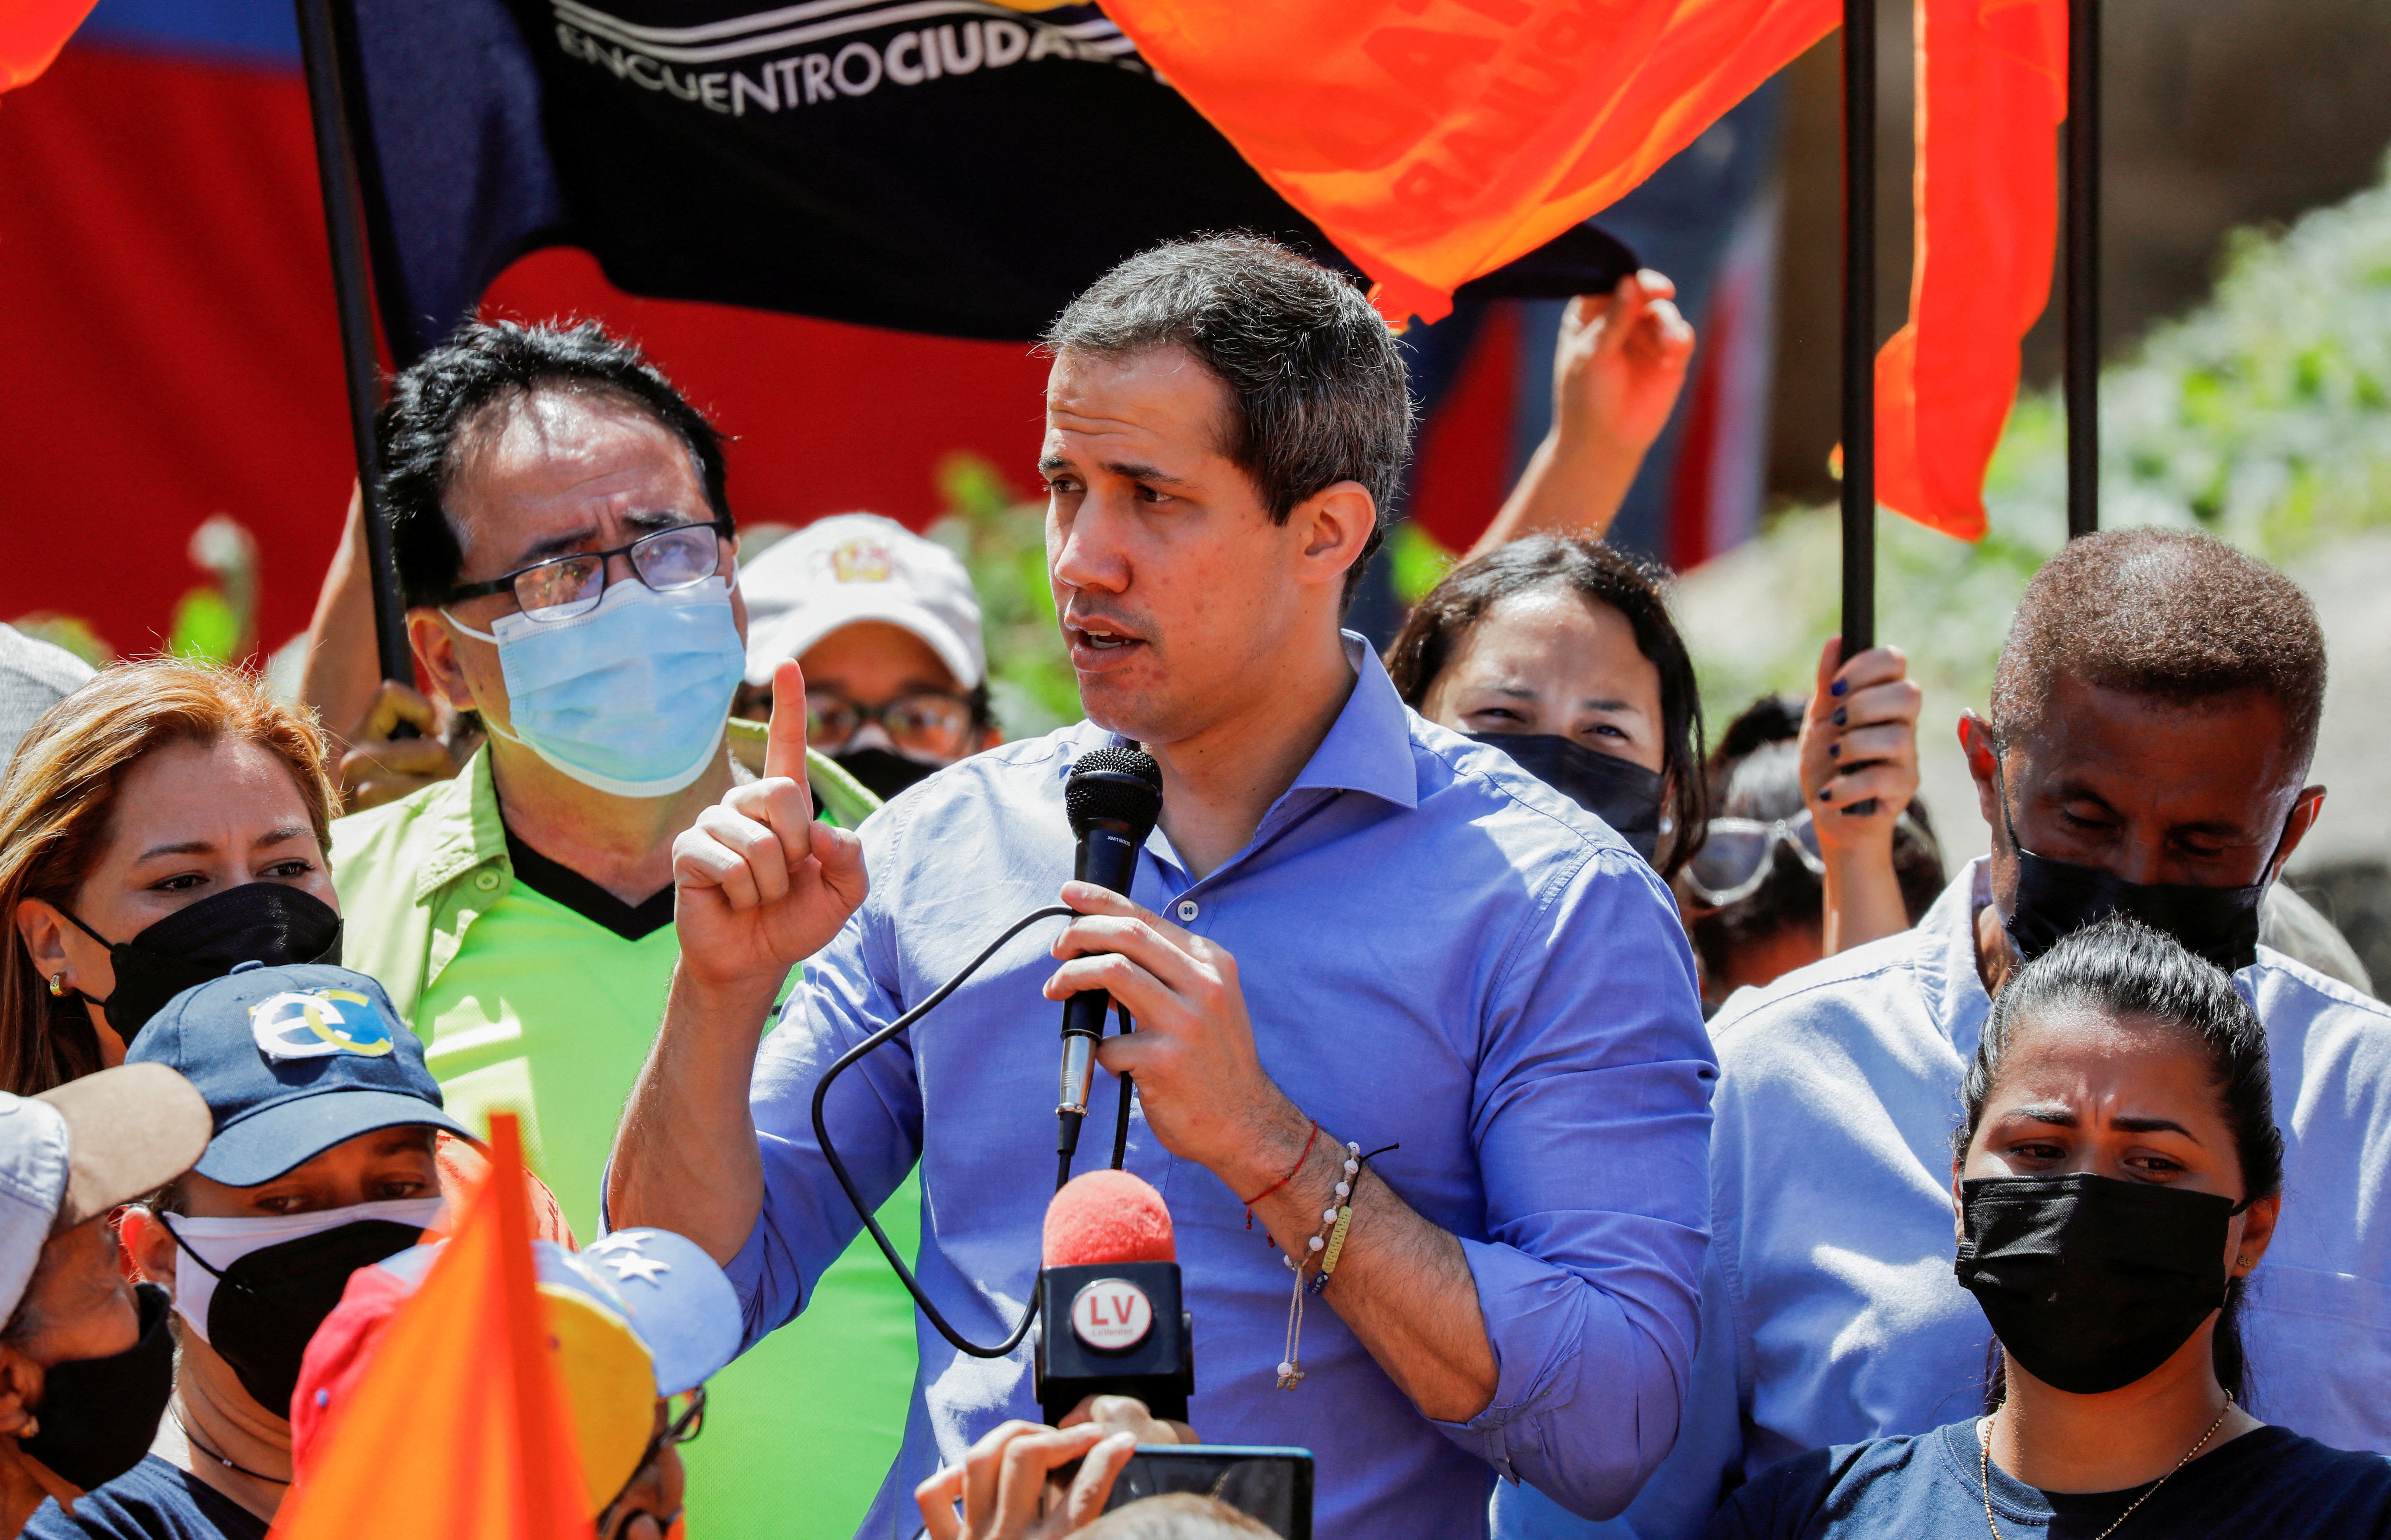 FILE PHOTO: Venezuelan opposition leader Juan Guaido meets supporters during an event called "Save Venezuela", in Maiquetia